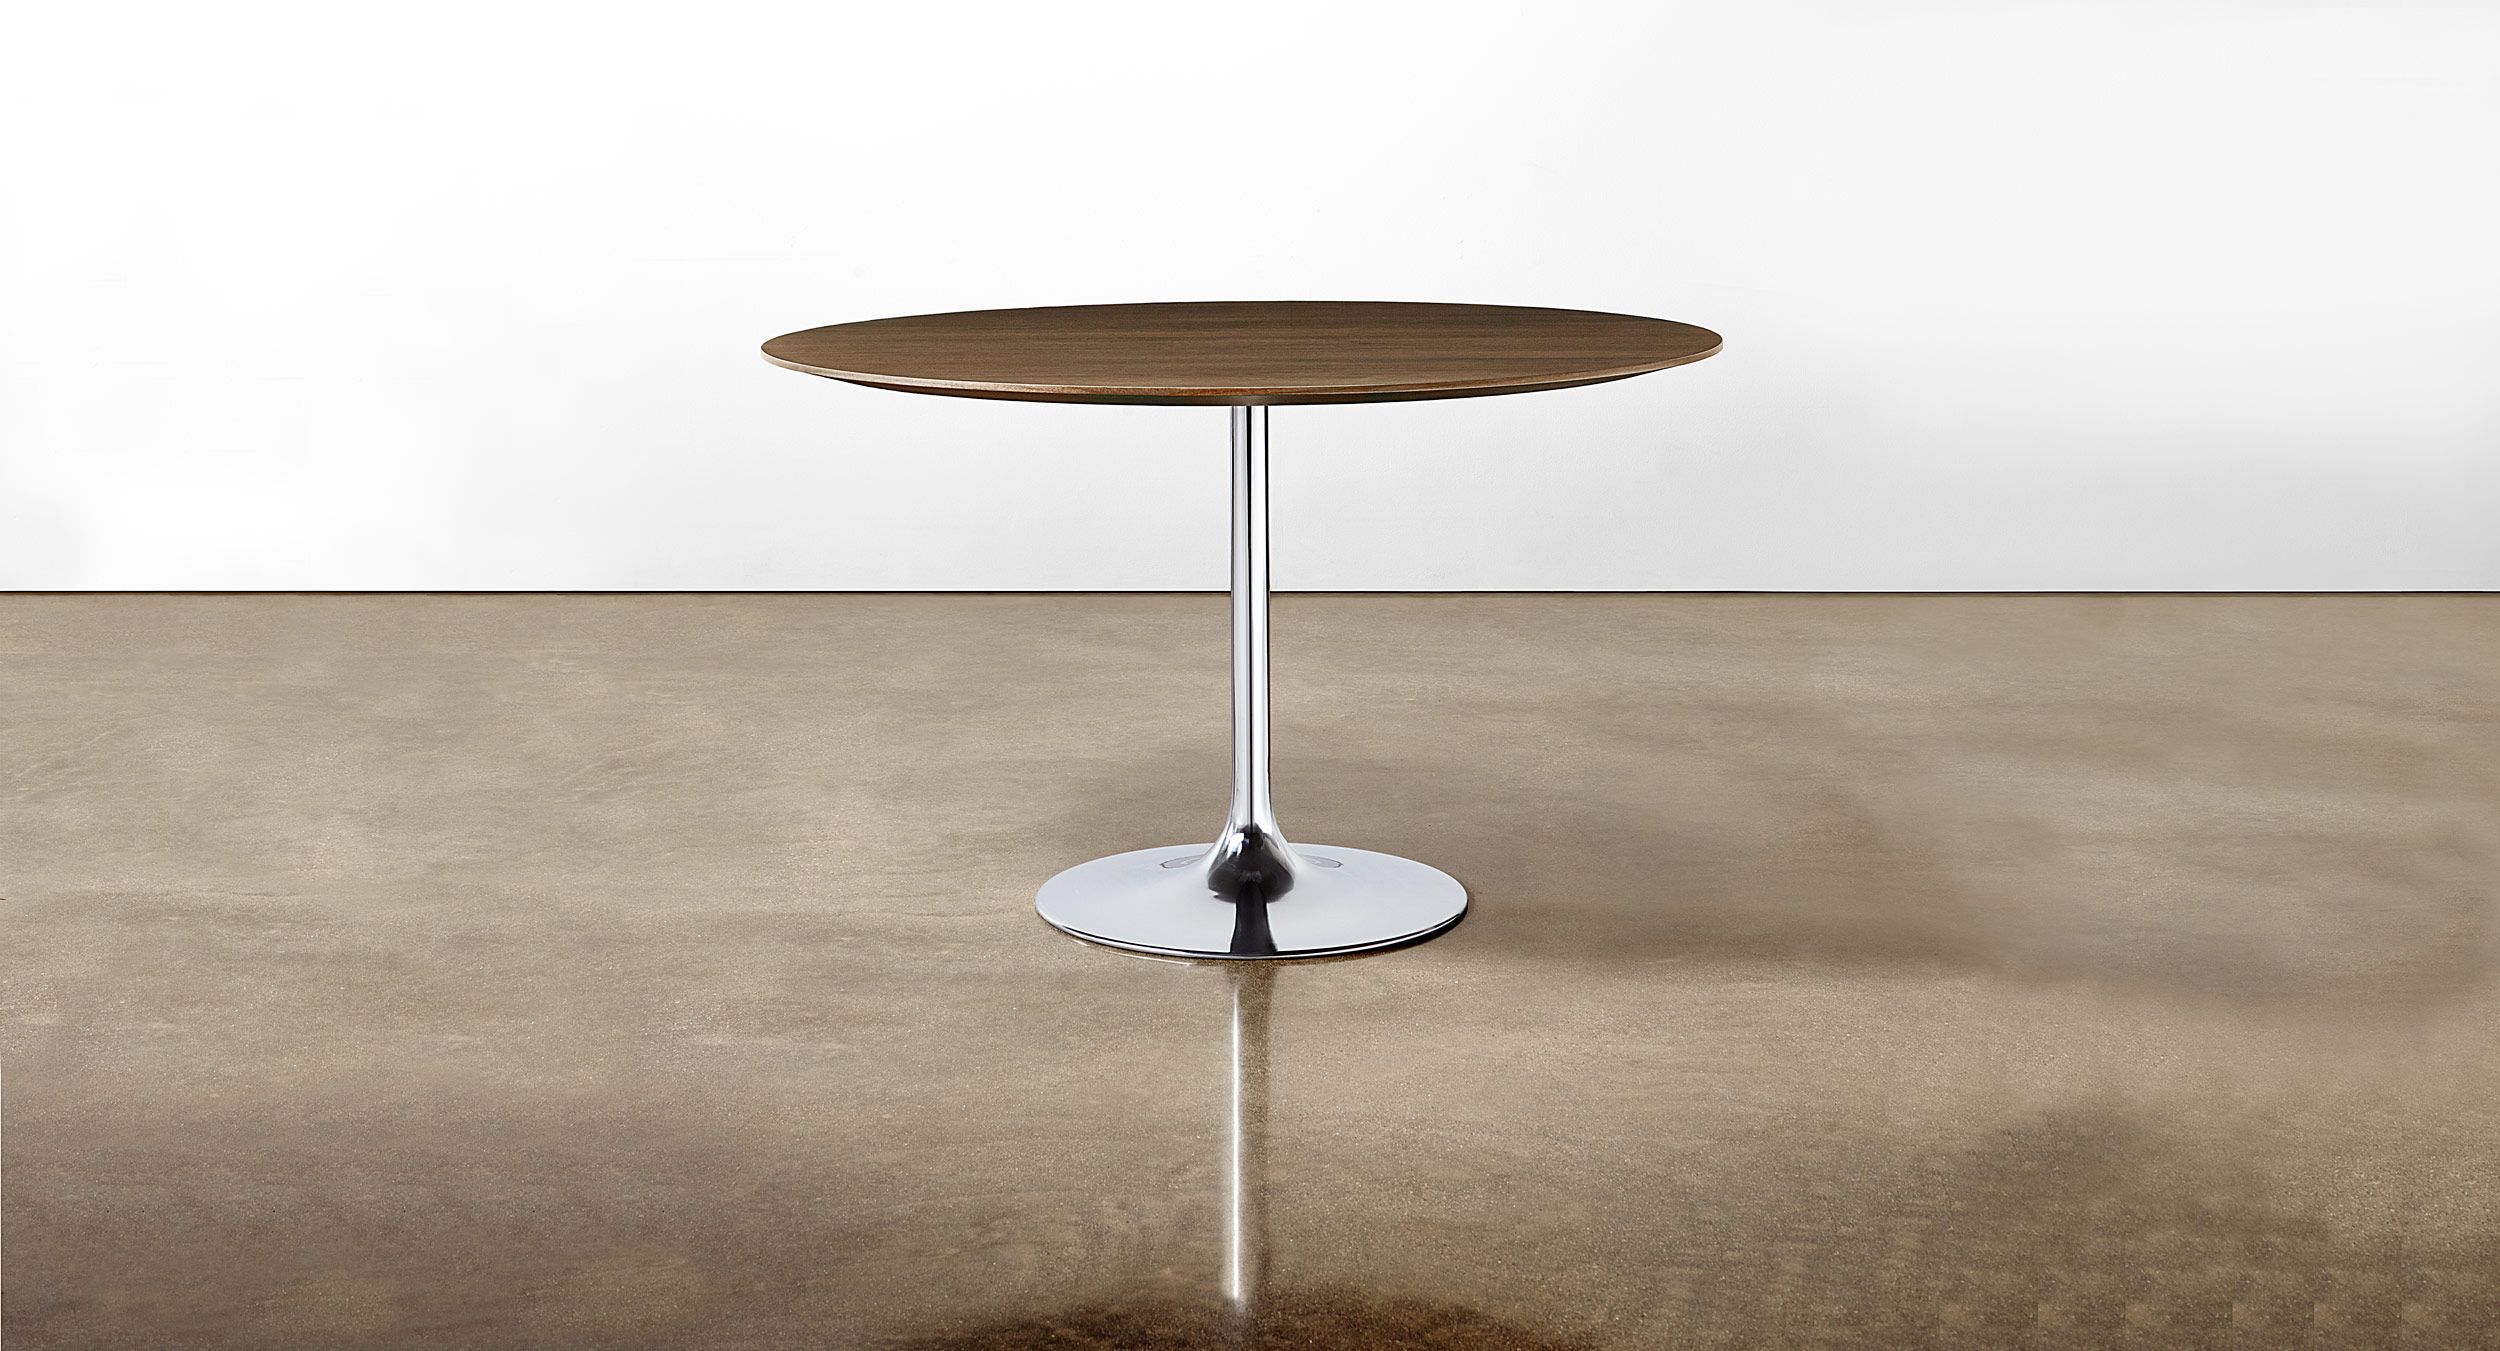 Sessions table with sculptural Trumpet base